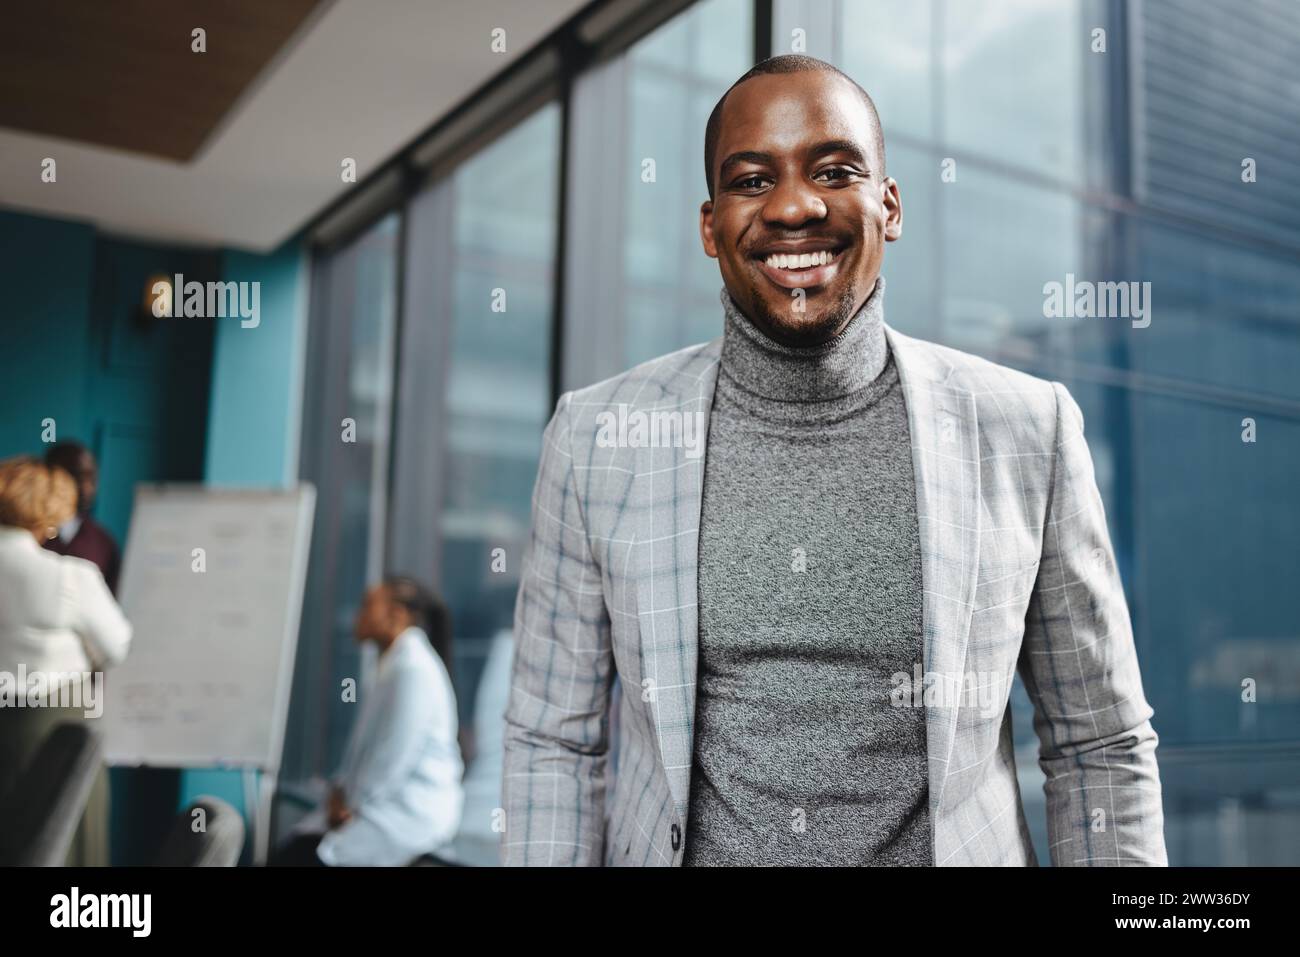 Young African male entrepreneur stands confidently in a modern office boardroom, surrounded by a diverse and professional team. Smiling at the camera, Stock Photo